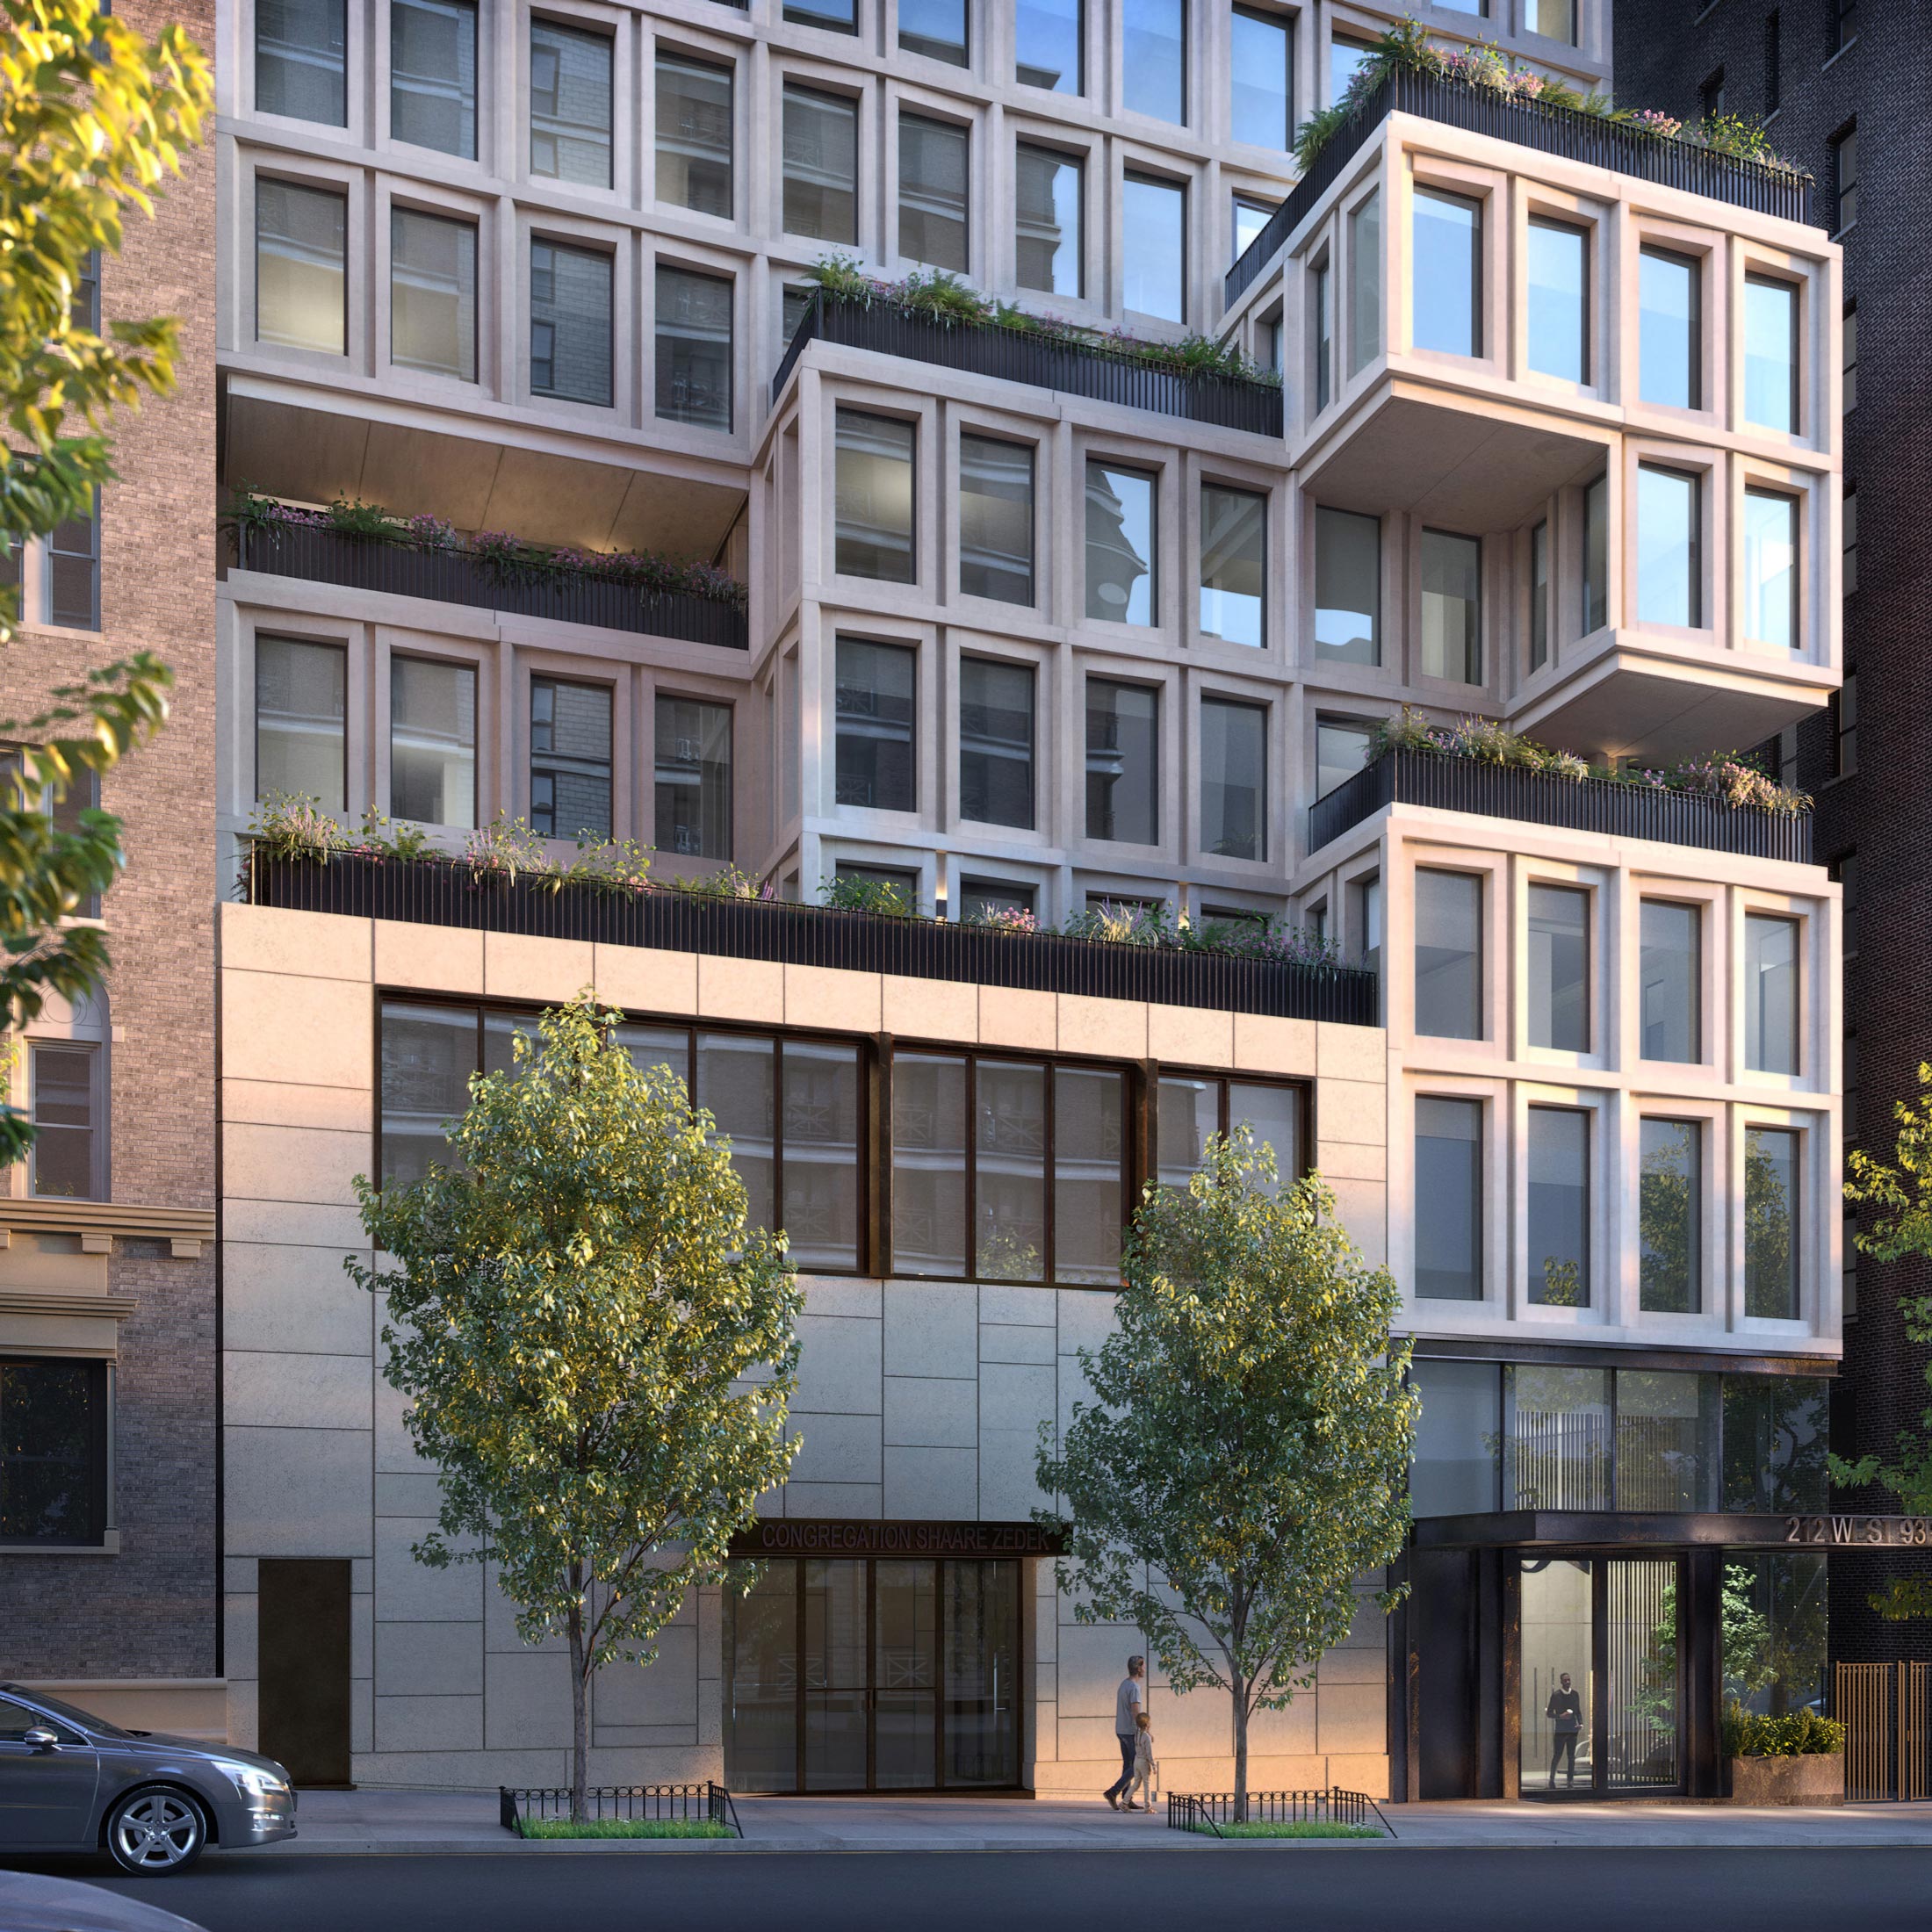 Detail of the Architectural Rendering of the exterior of the 212W93 project located on the Upper West Side, New York City